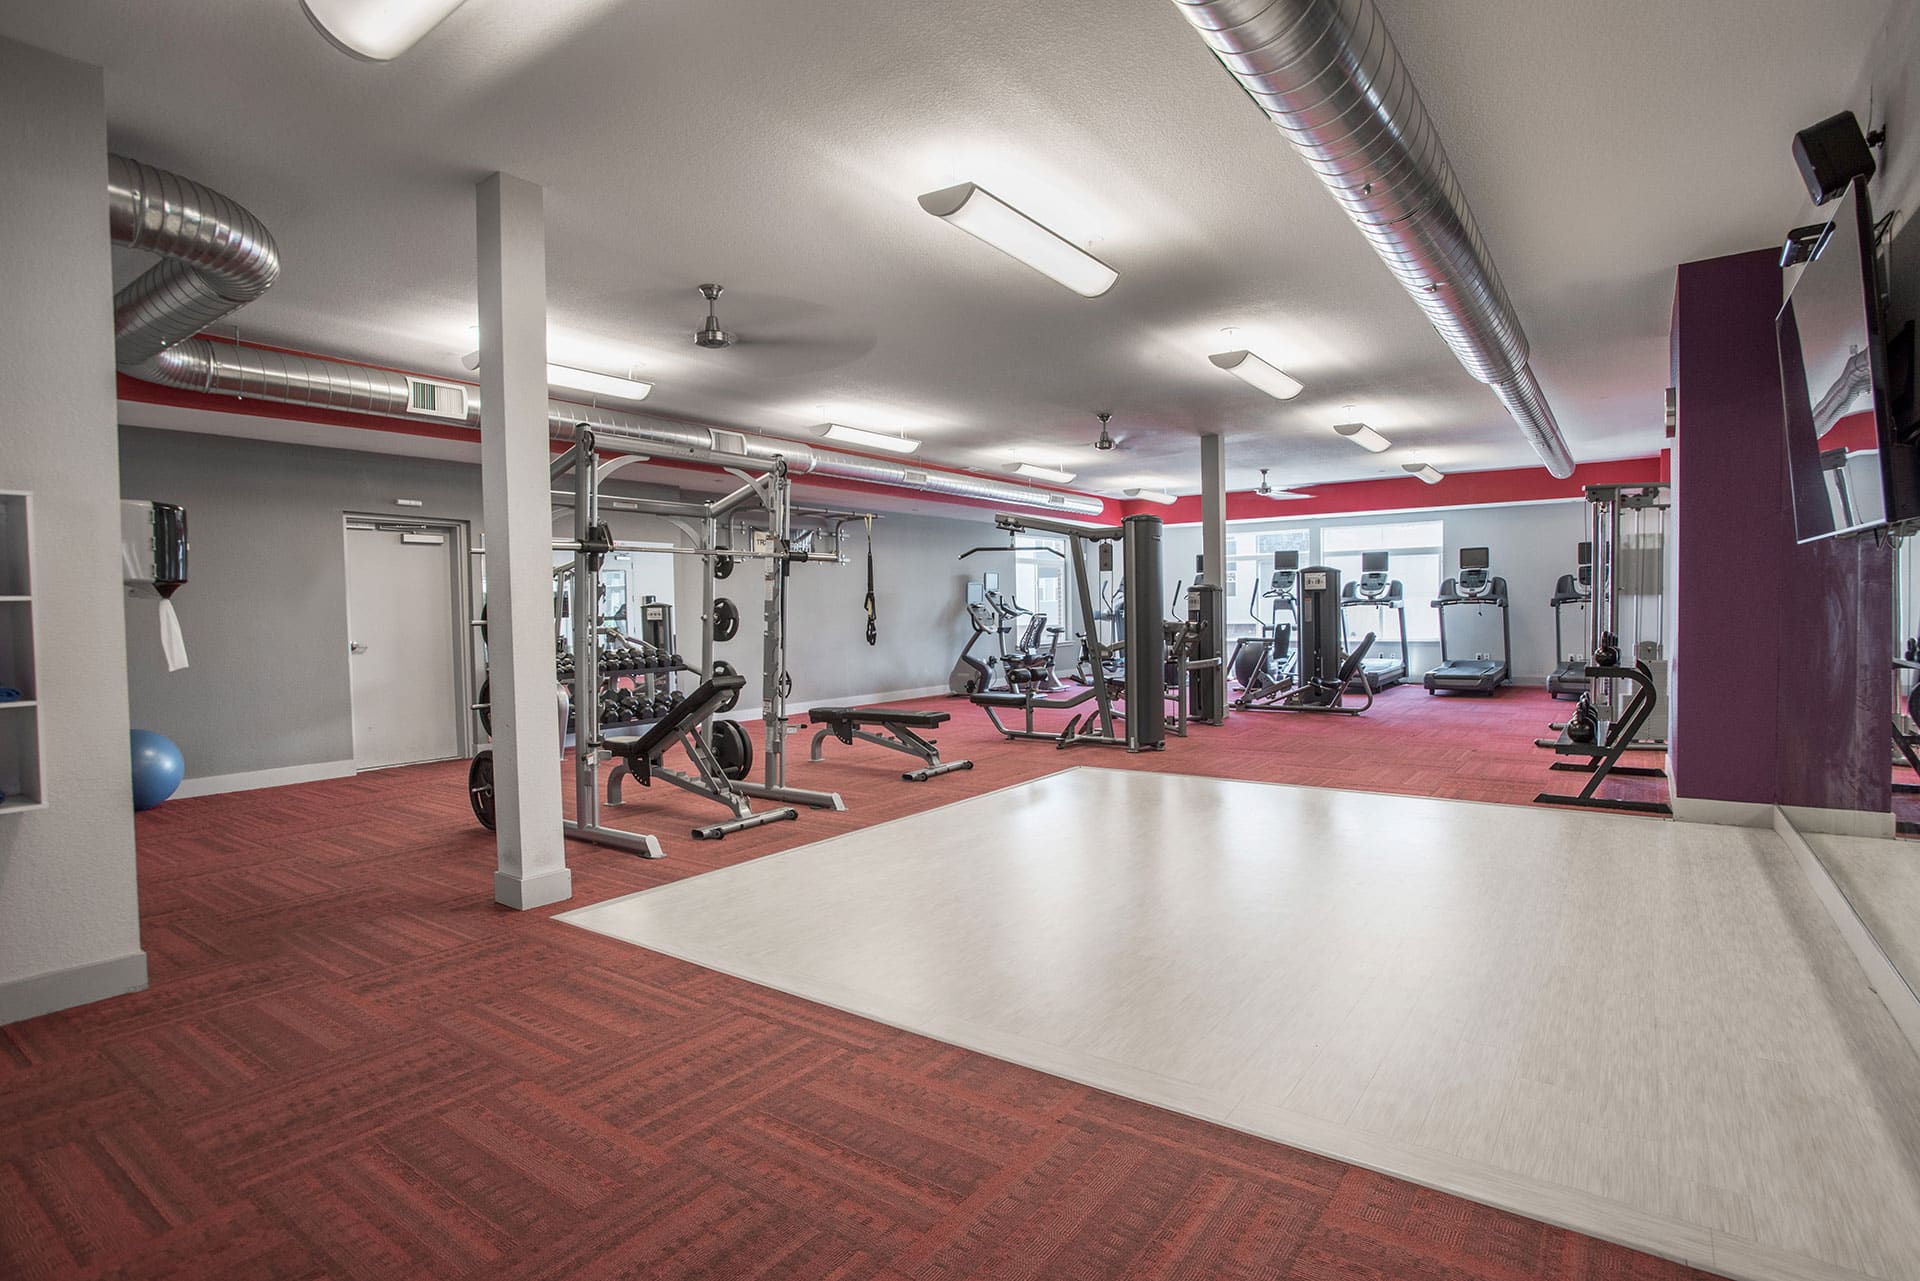 Fitness center with professional weight and cardio machines.